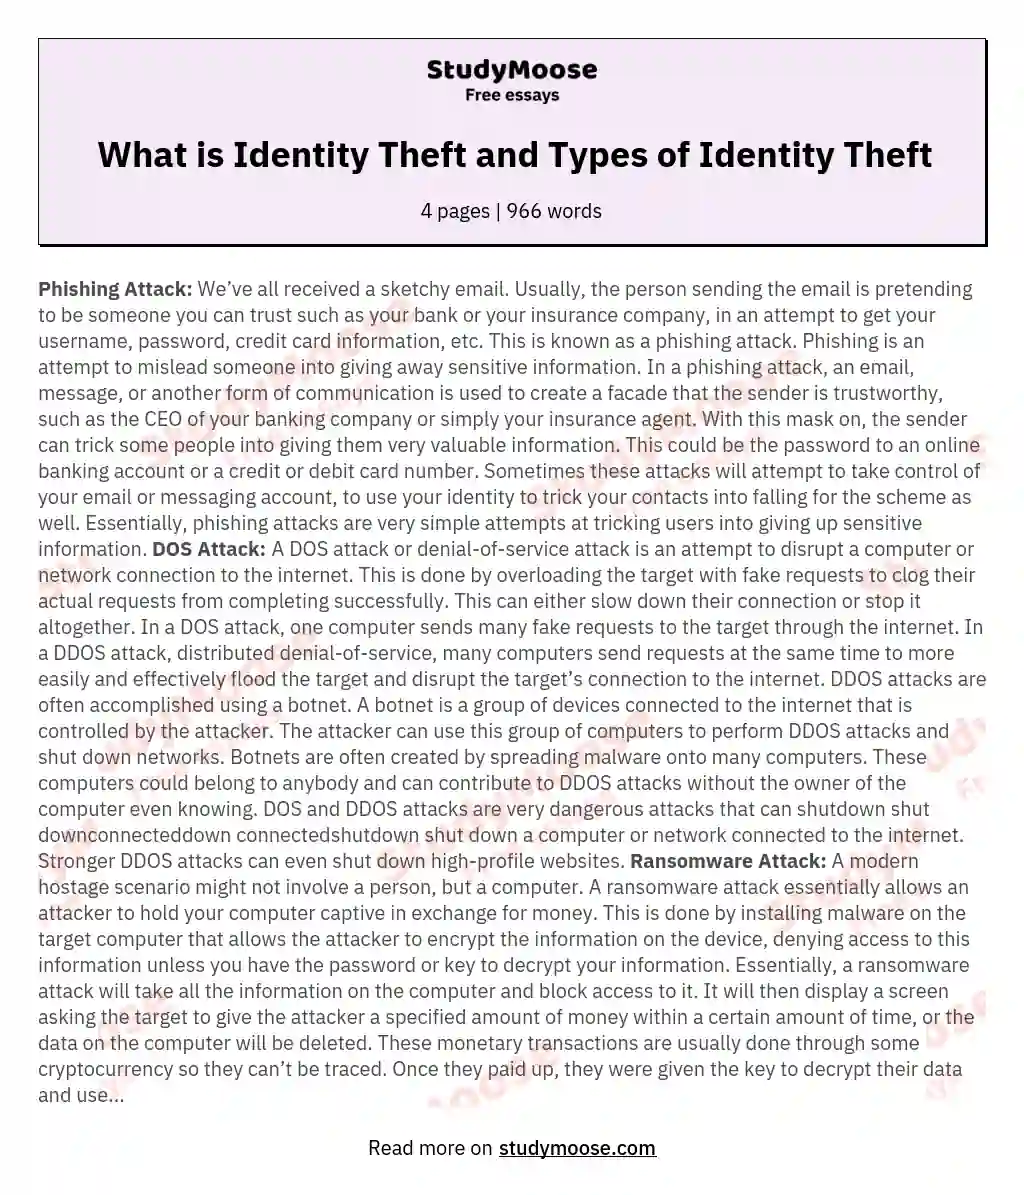 What is Identity Theft and Types of Identity Theft essay